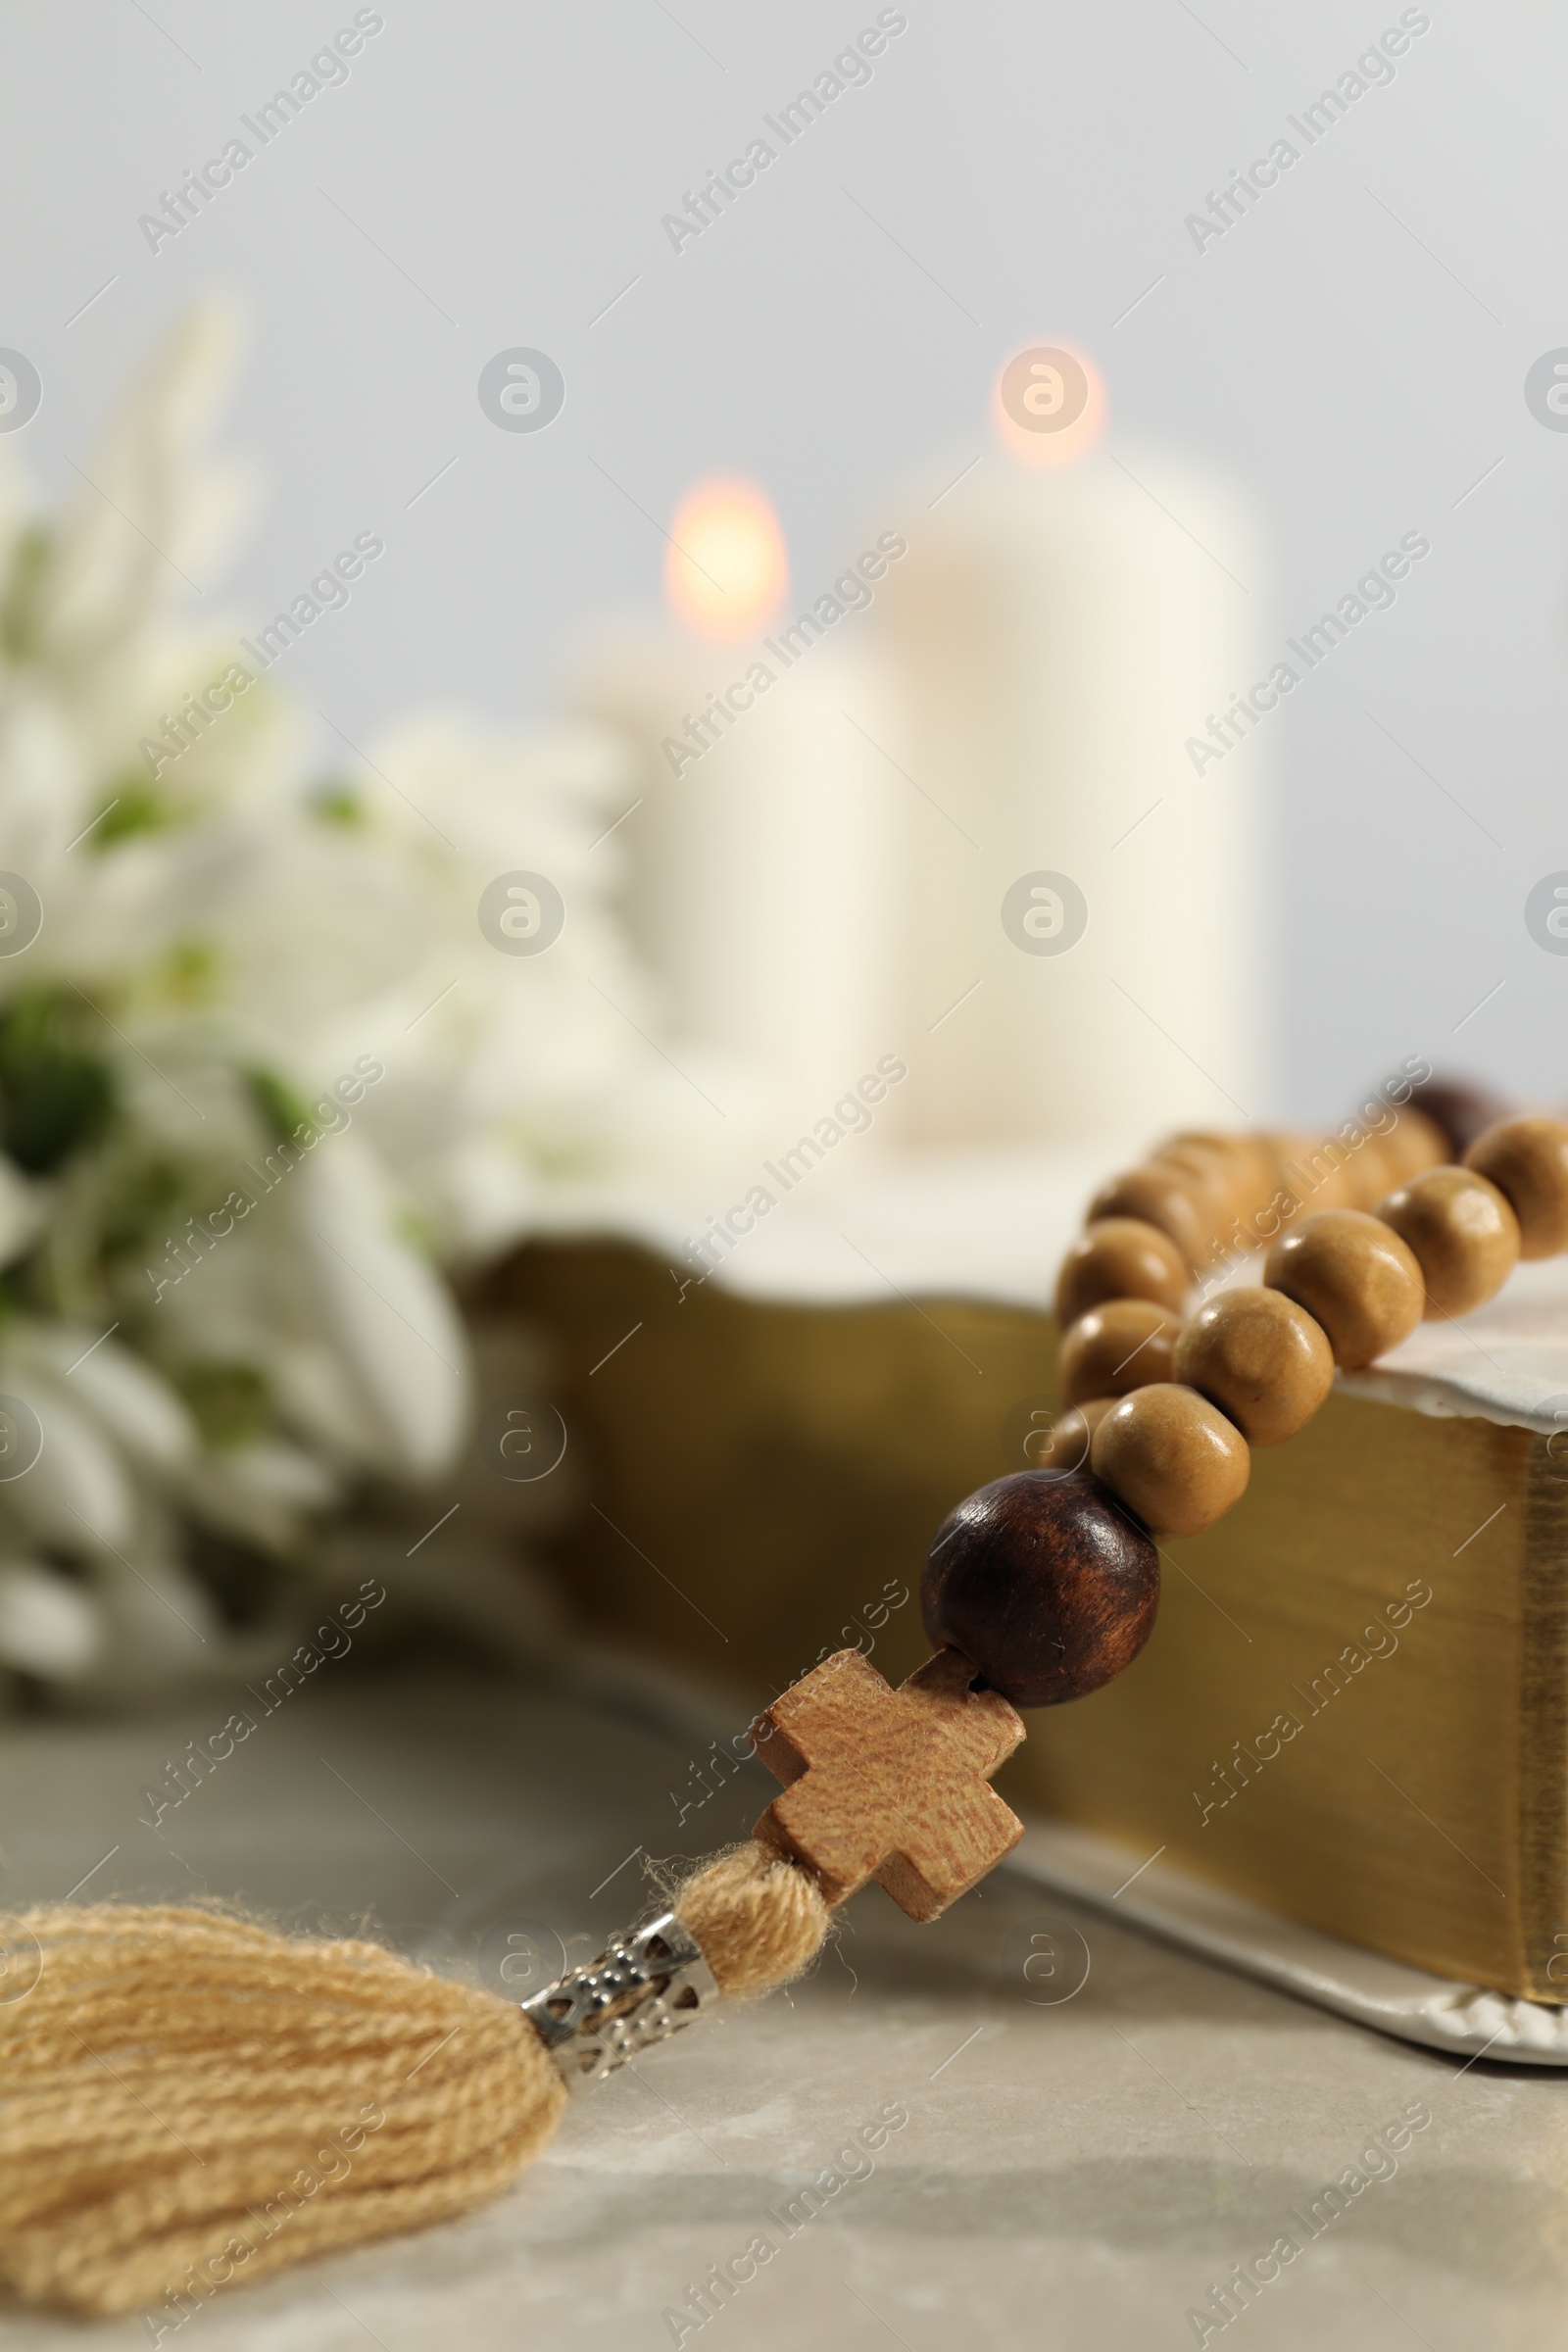 Photo of Bible, rosary beads and church candles on light table, closeup